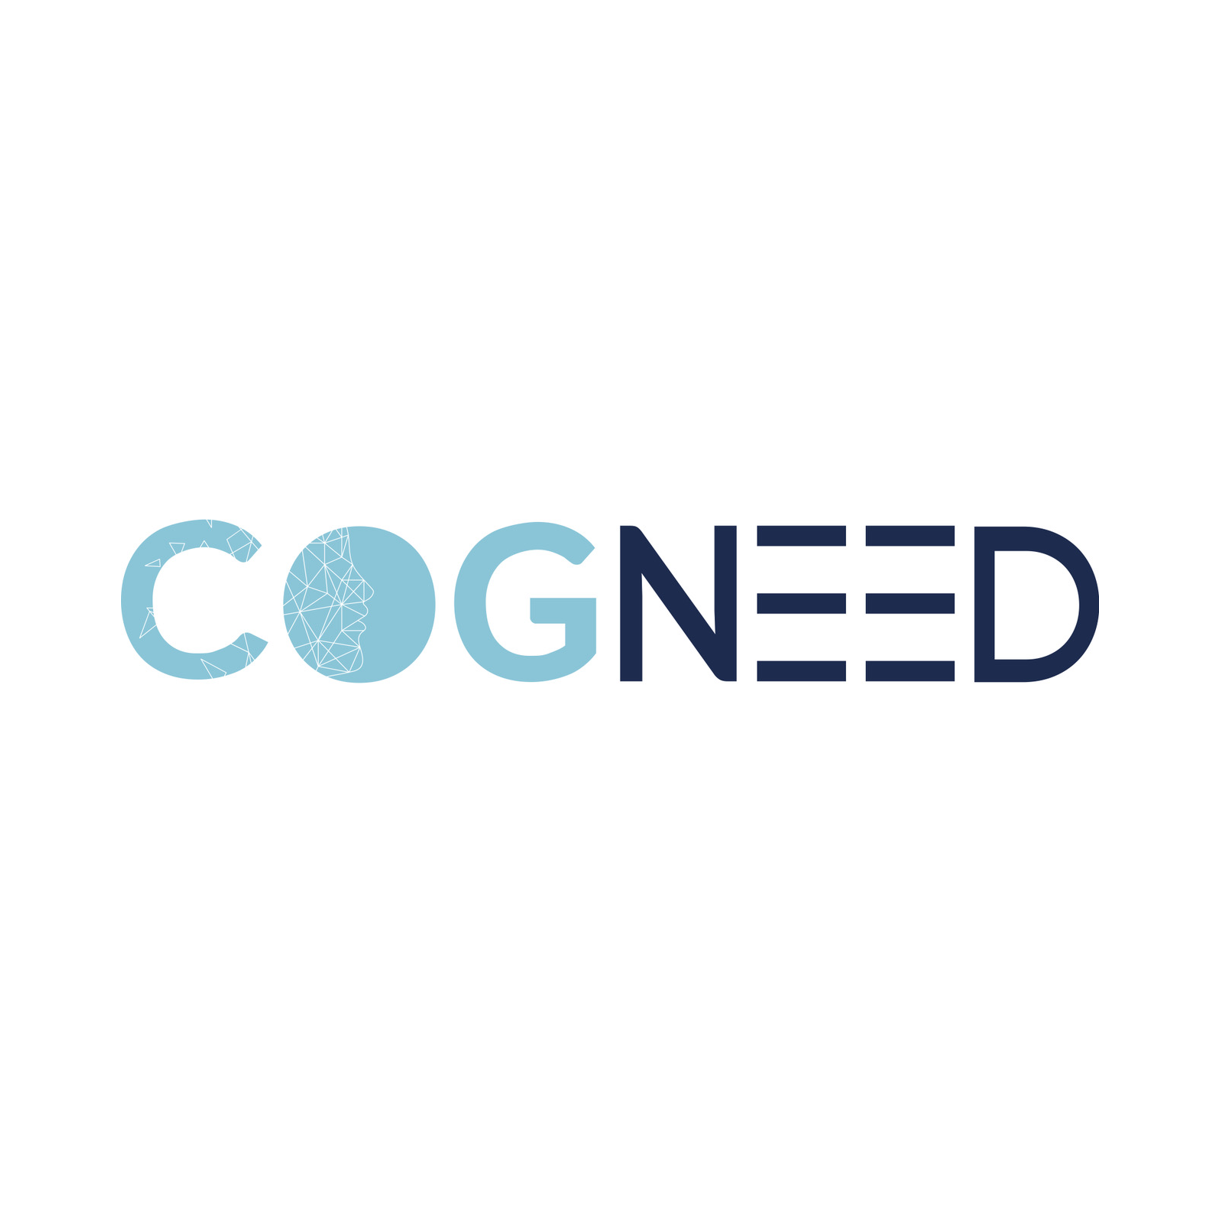 Cogneed